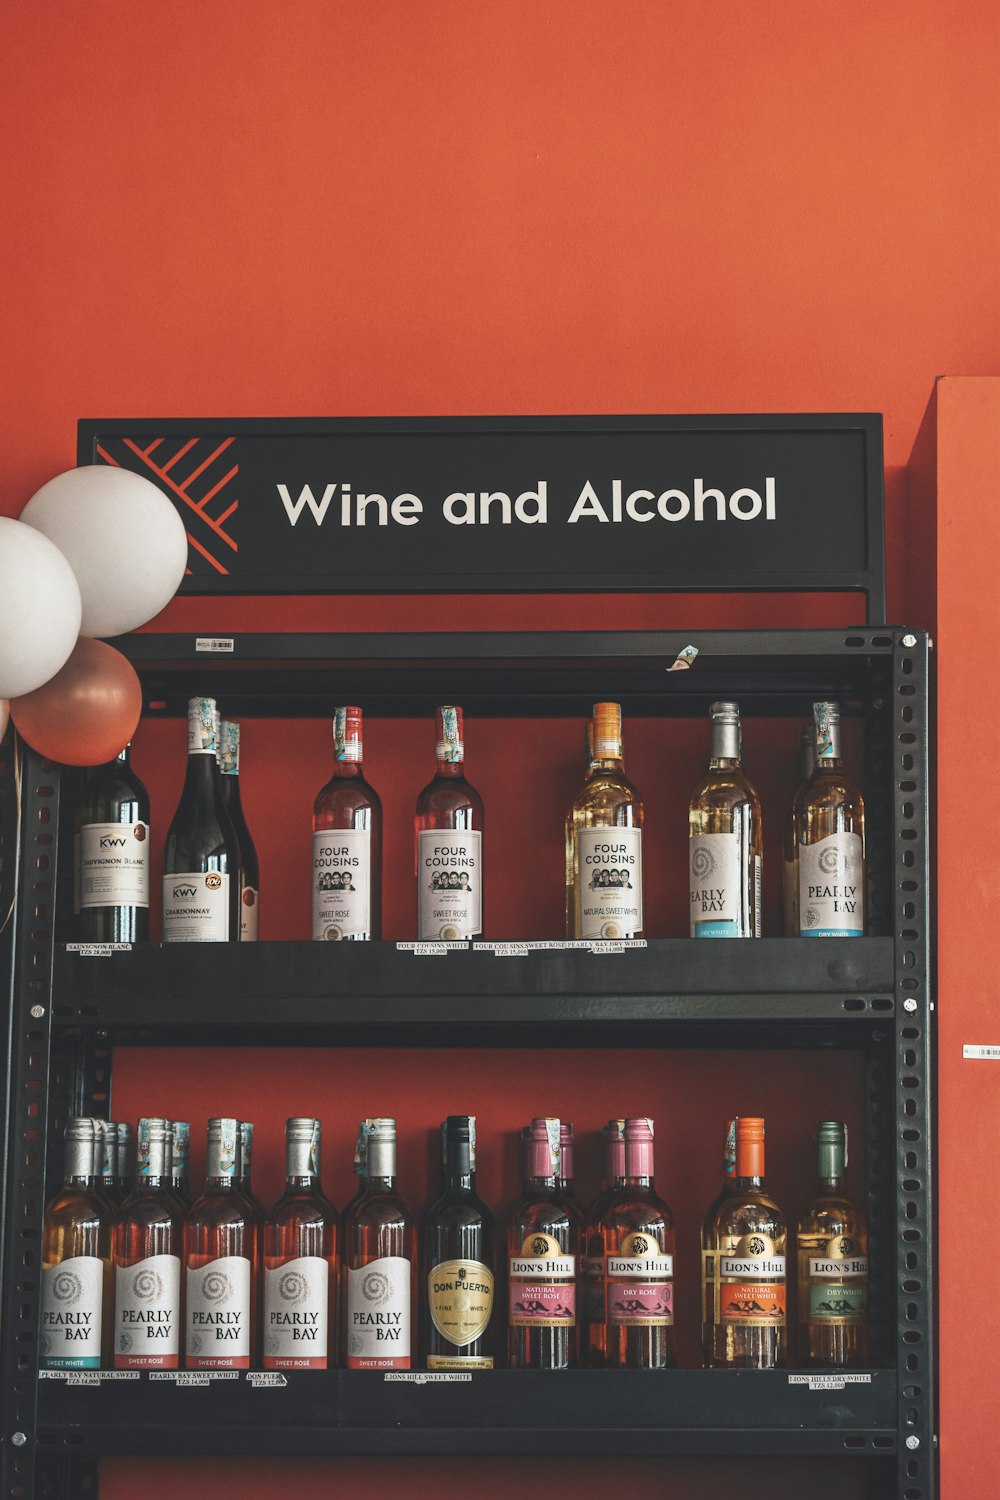 a wine and alcohol display in a store